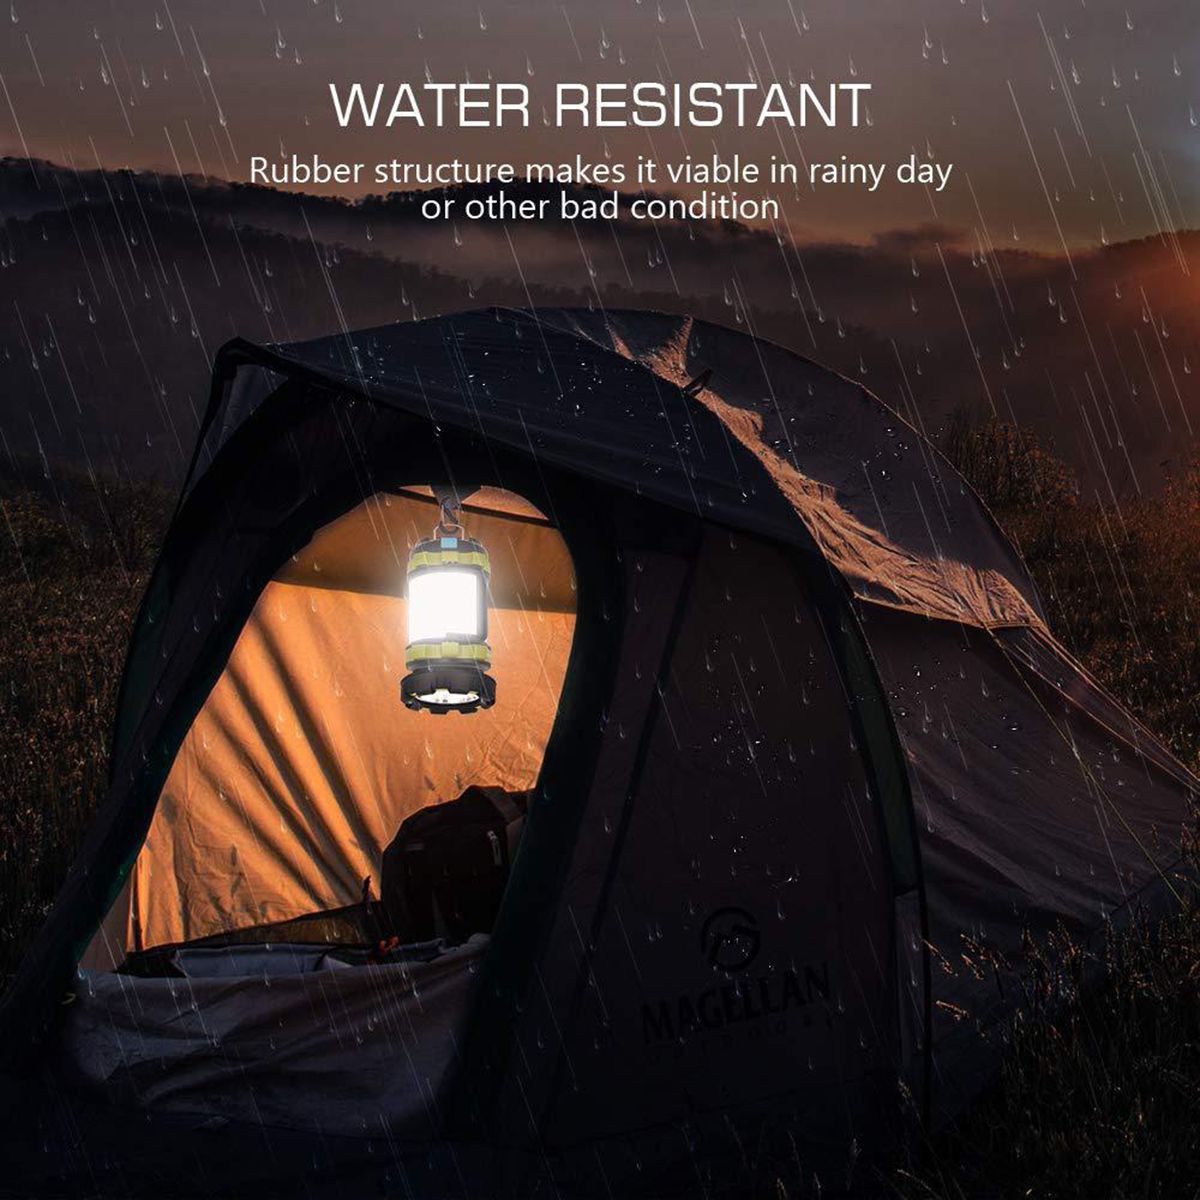 LED-Flashlight-Camping-Light-Torch-Lantern-USB-Rechargeable-USB-Charger-Worklight-Waterproof-1612111